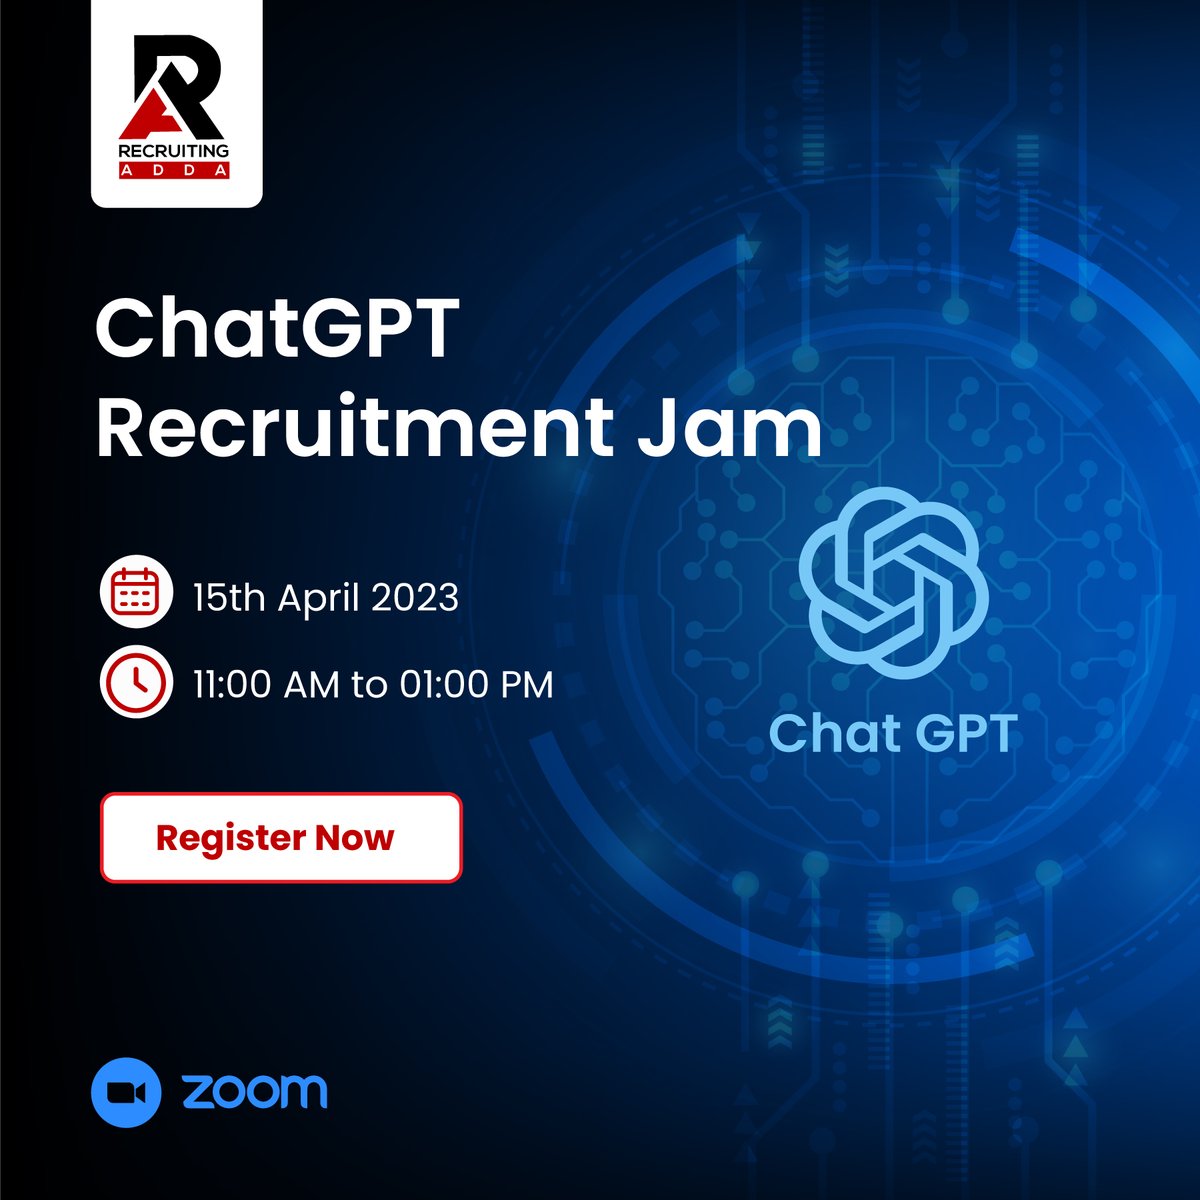 Revolutionise your Recruitment process with the power of Generative AI at the ChatGPT Recruitment Jam by Recruiting ADDA. Register Now: bit.ly/3nVsOOE 

#chatgpt #AI #chatbots #RAChatGPTWebinar #recruitingadda #sourcingadda #recruitment2023 #communityevent